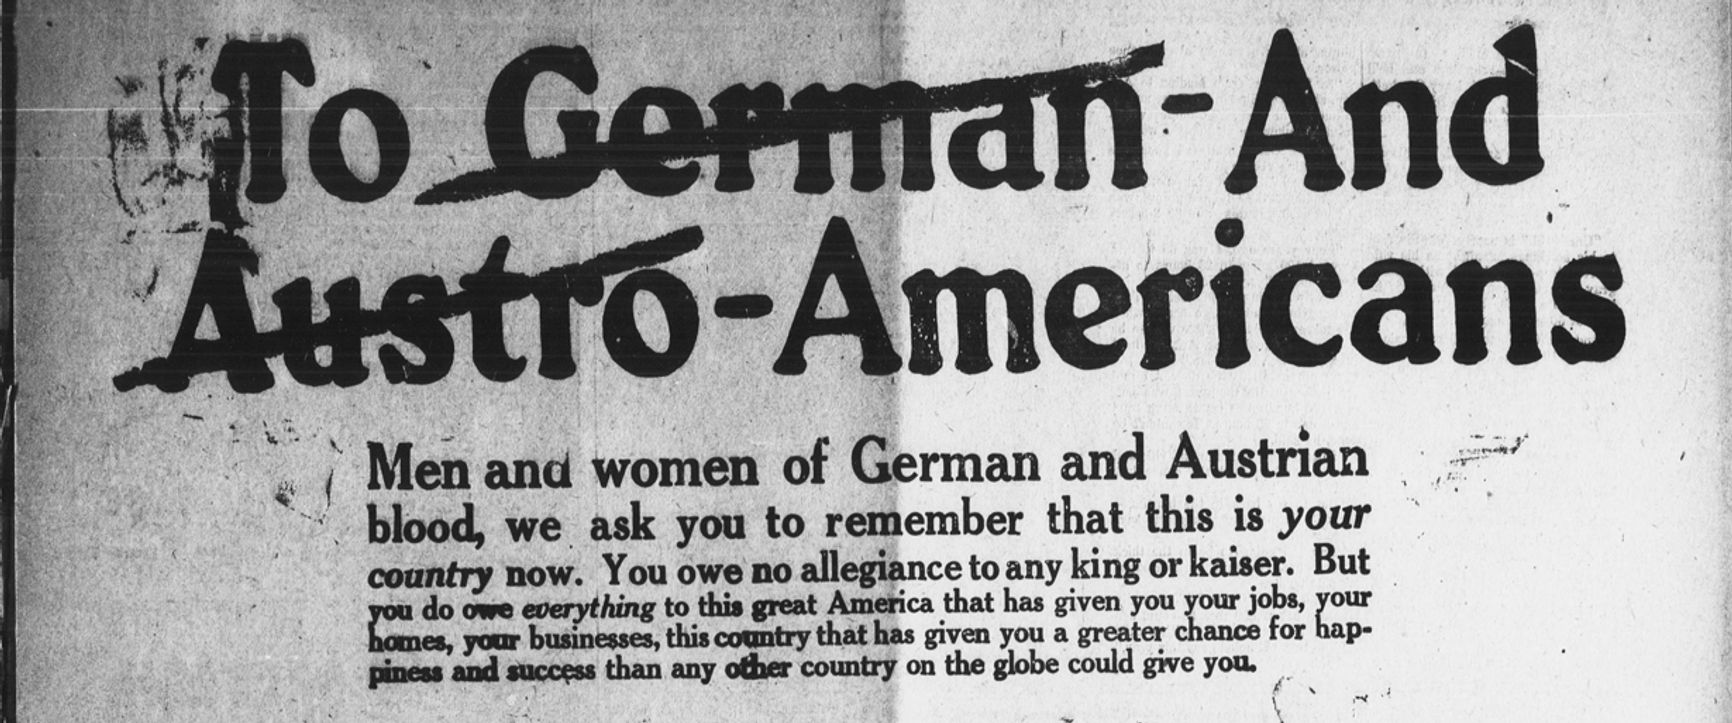 A fragment of Liberty Bond advertising, in which Americans of German and Austrian descent are persuaded to show loyalty to the United States